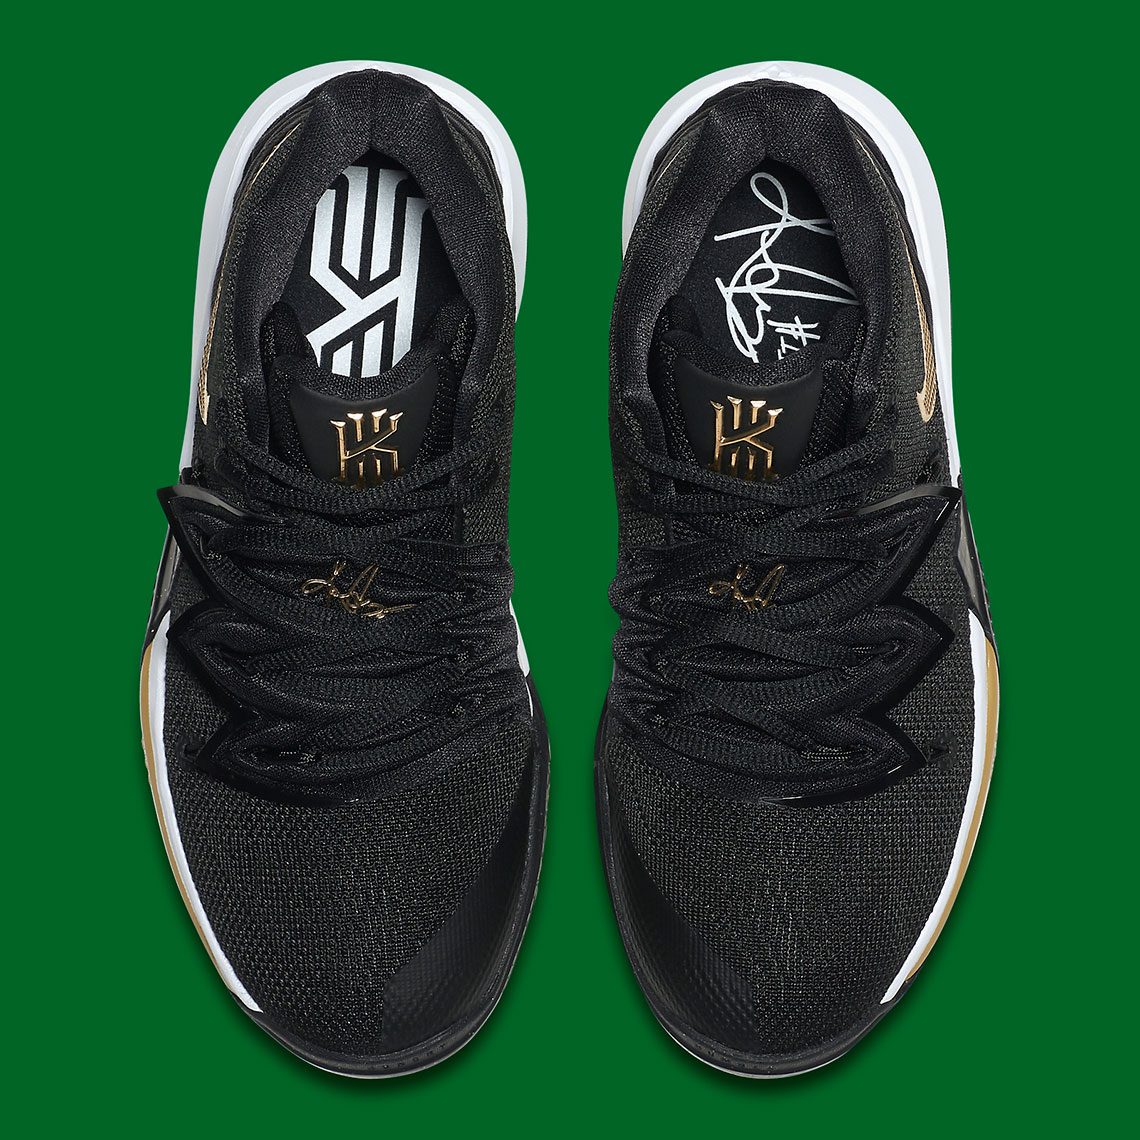 nike kyrie black and gold